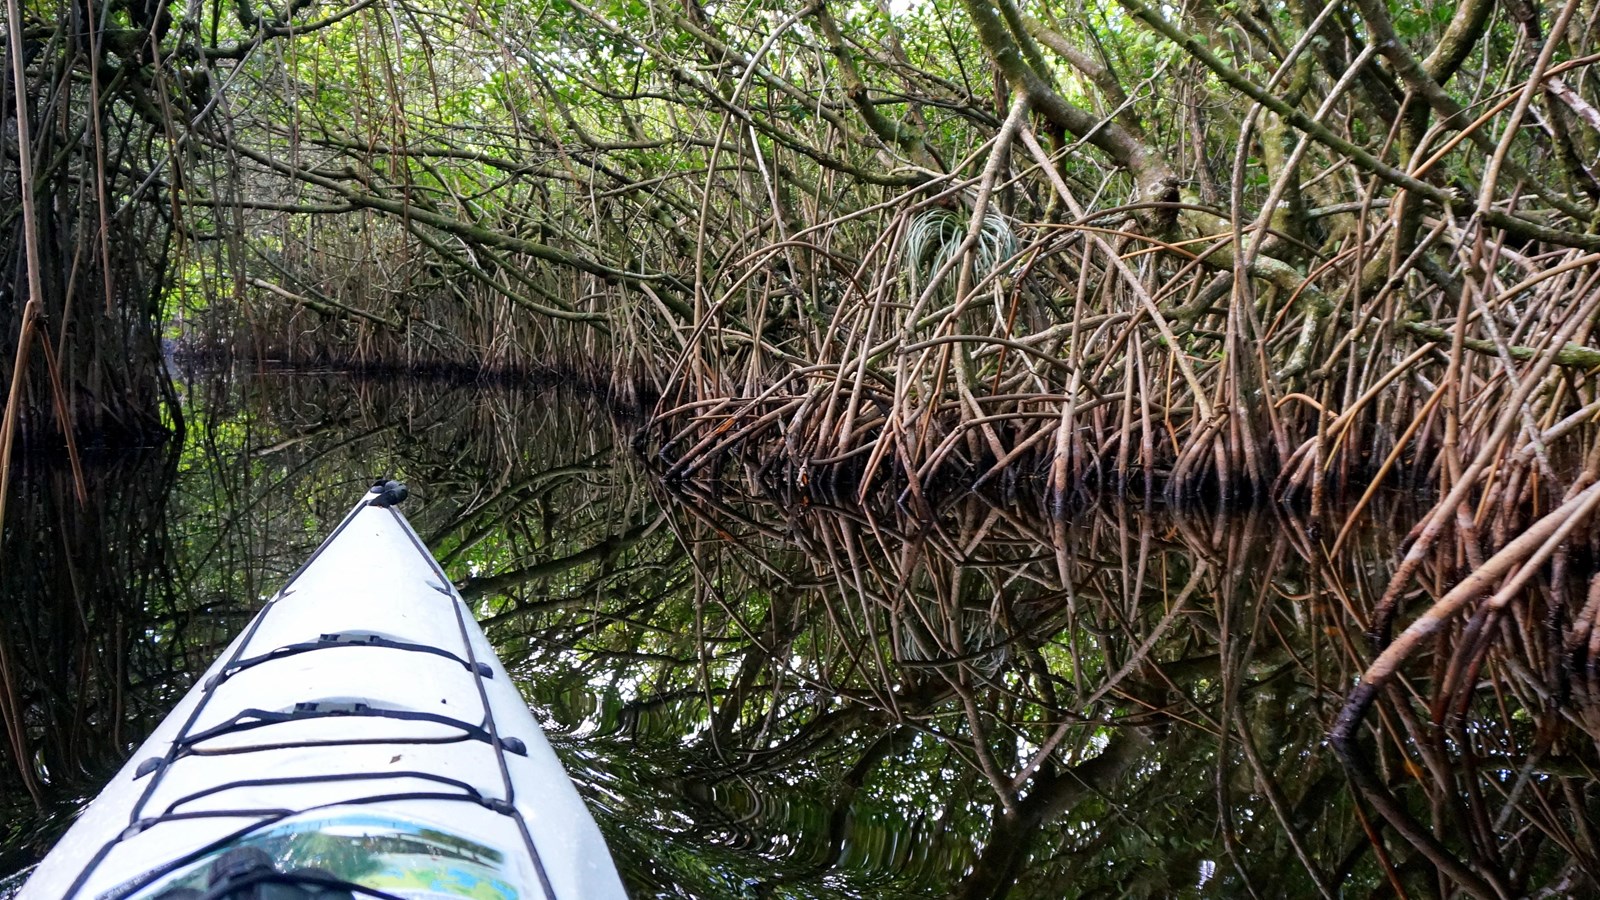 The bow of a kayak in the water and dense mangrove trees in front and to the side.